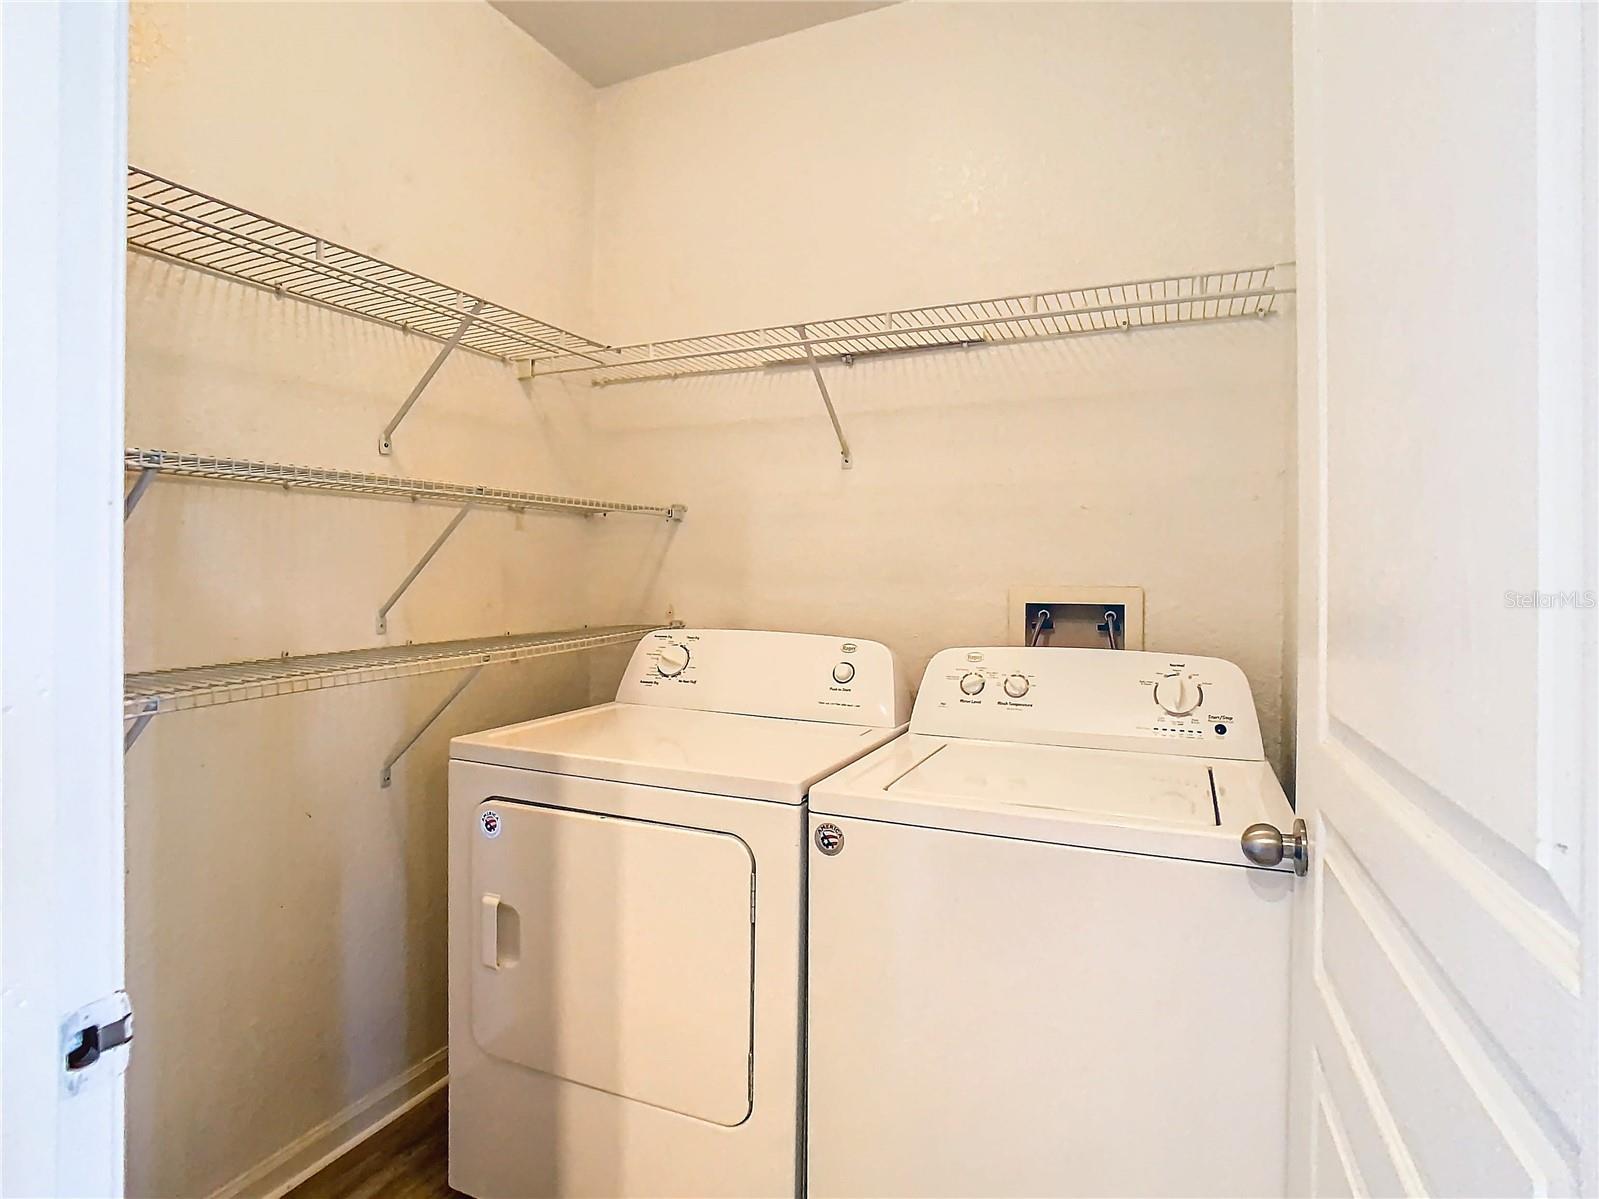 Full laundry room off kitchen. Washer & dryer included.